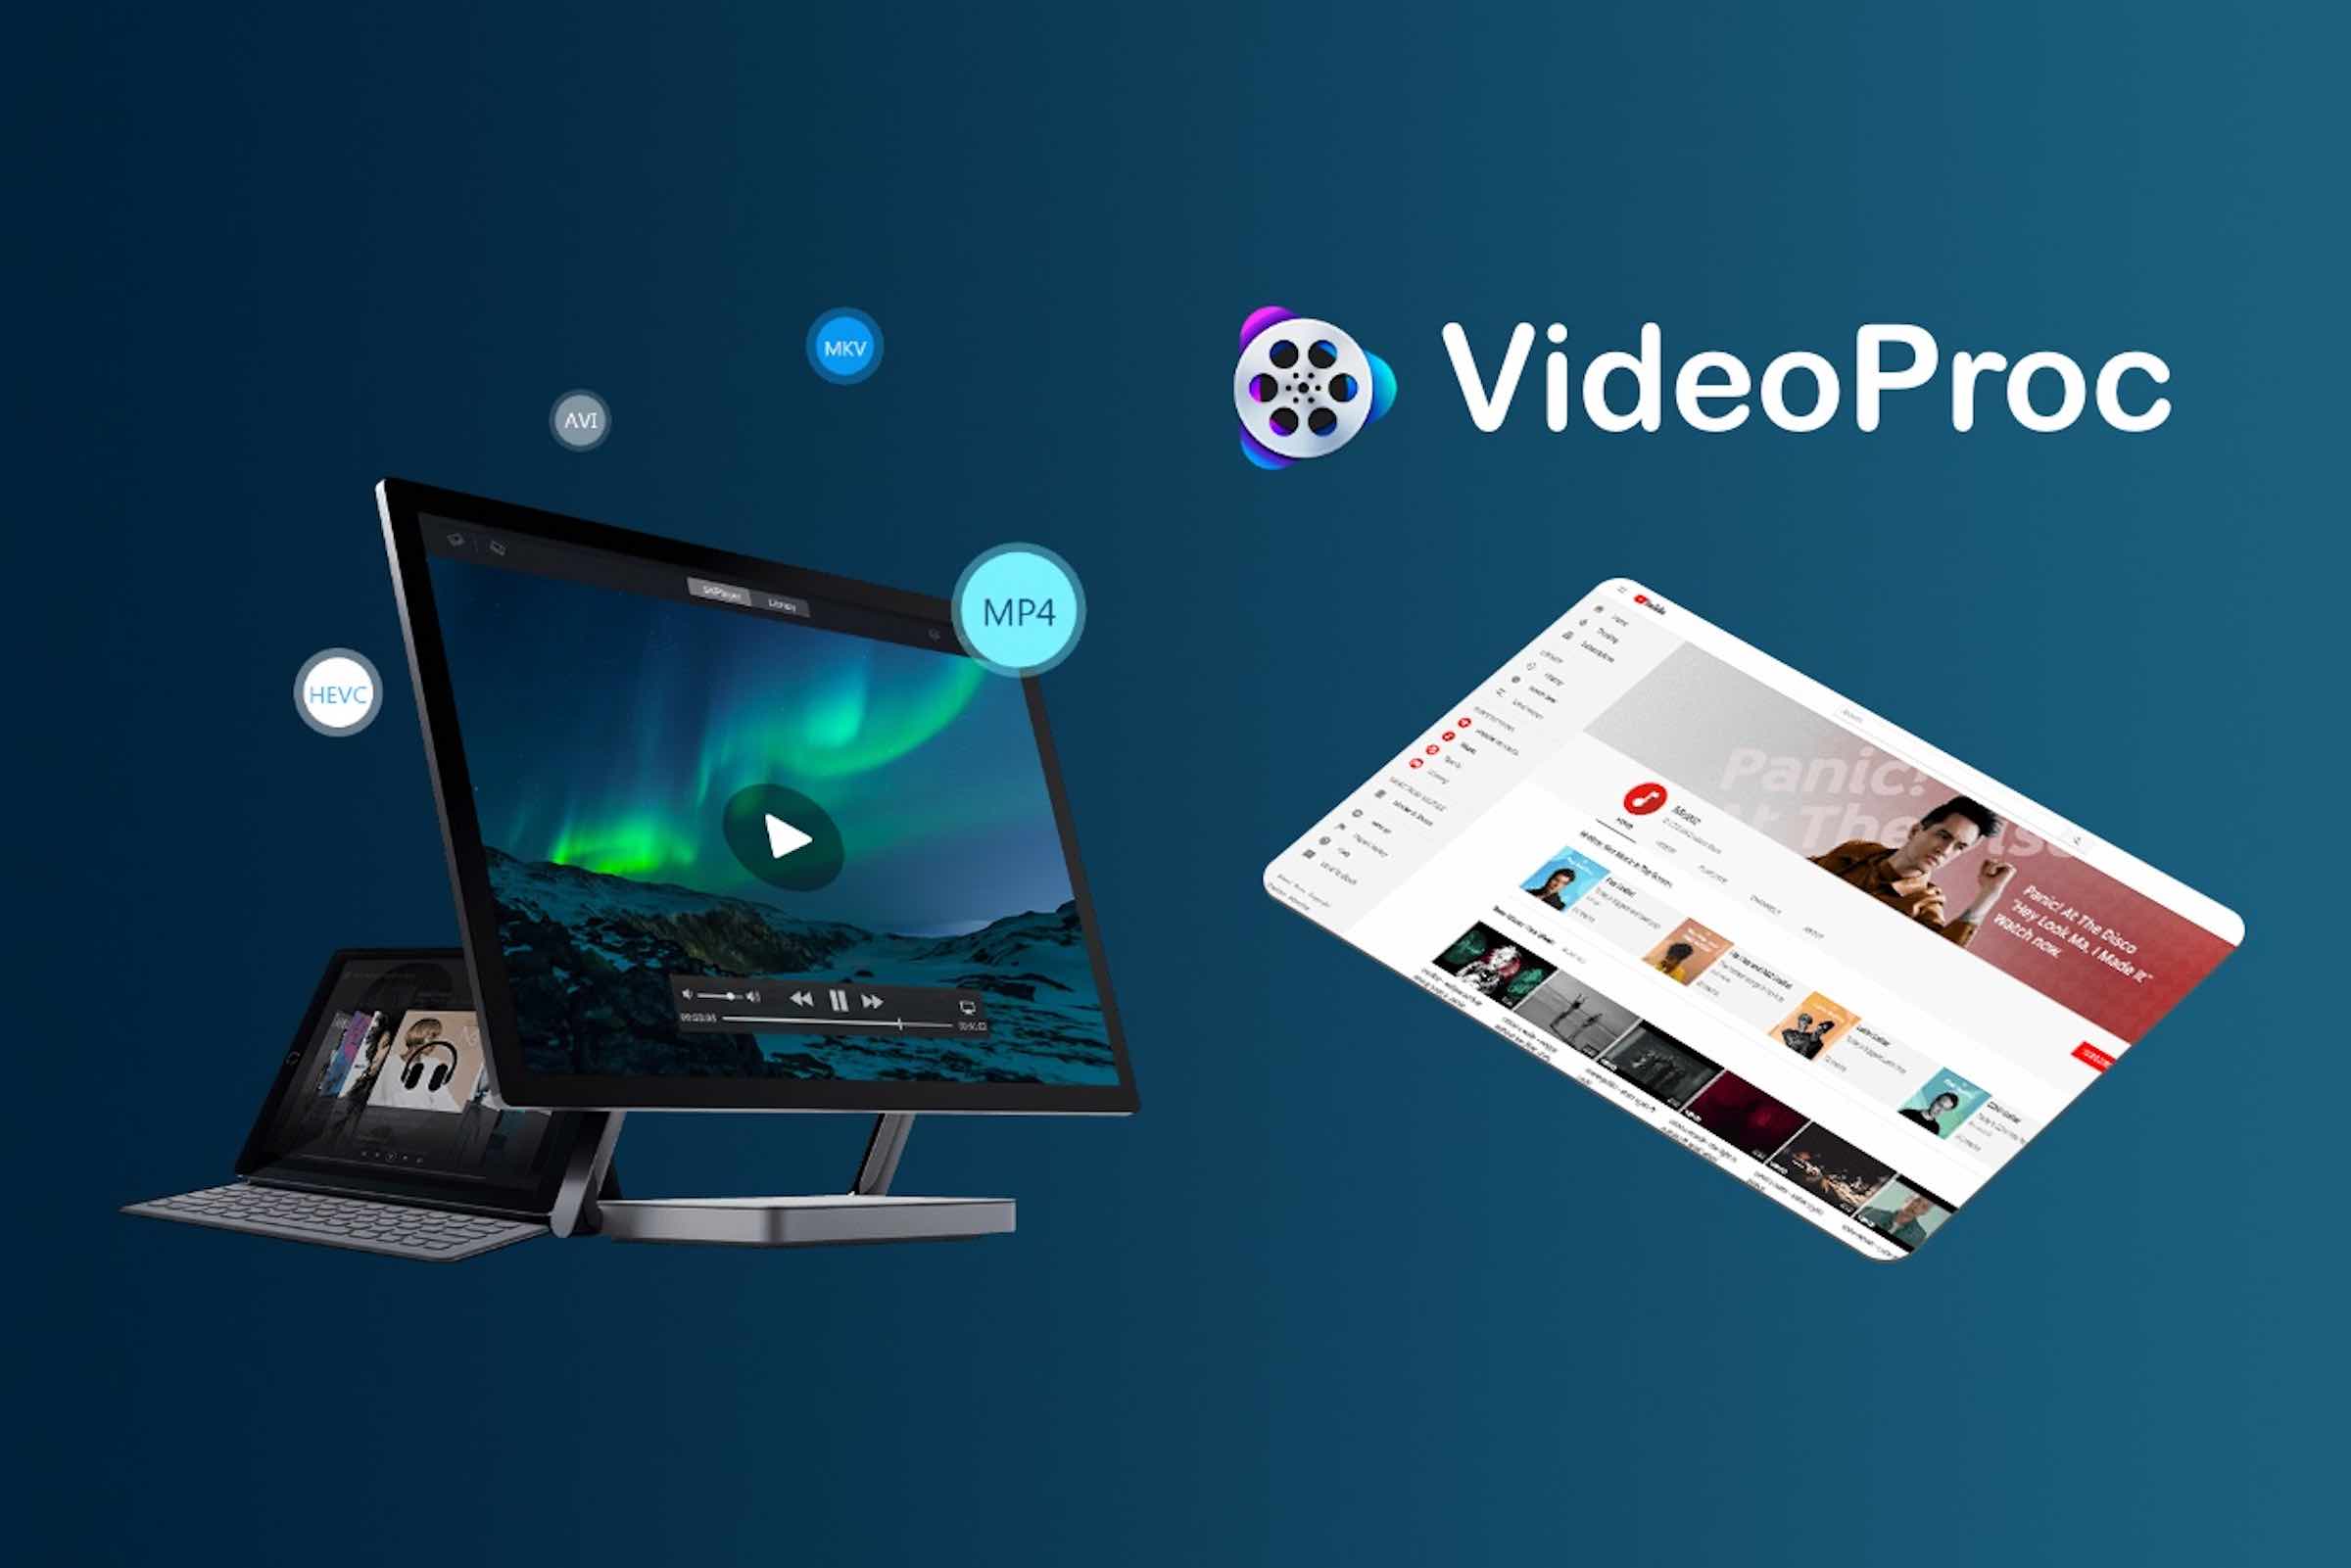 We at Film Daily want to give video content creators an answer to all their problems – VideoProc. Here's why this has become our editing go-to.